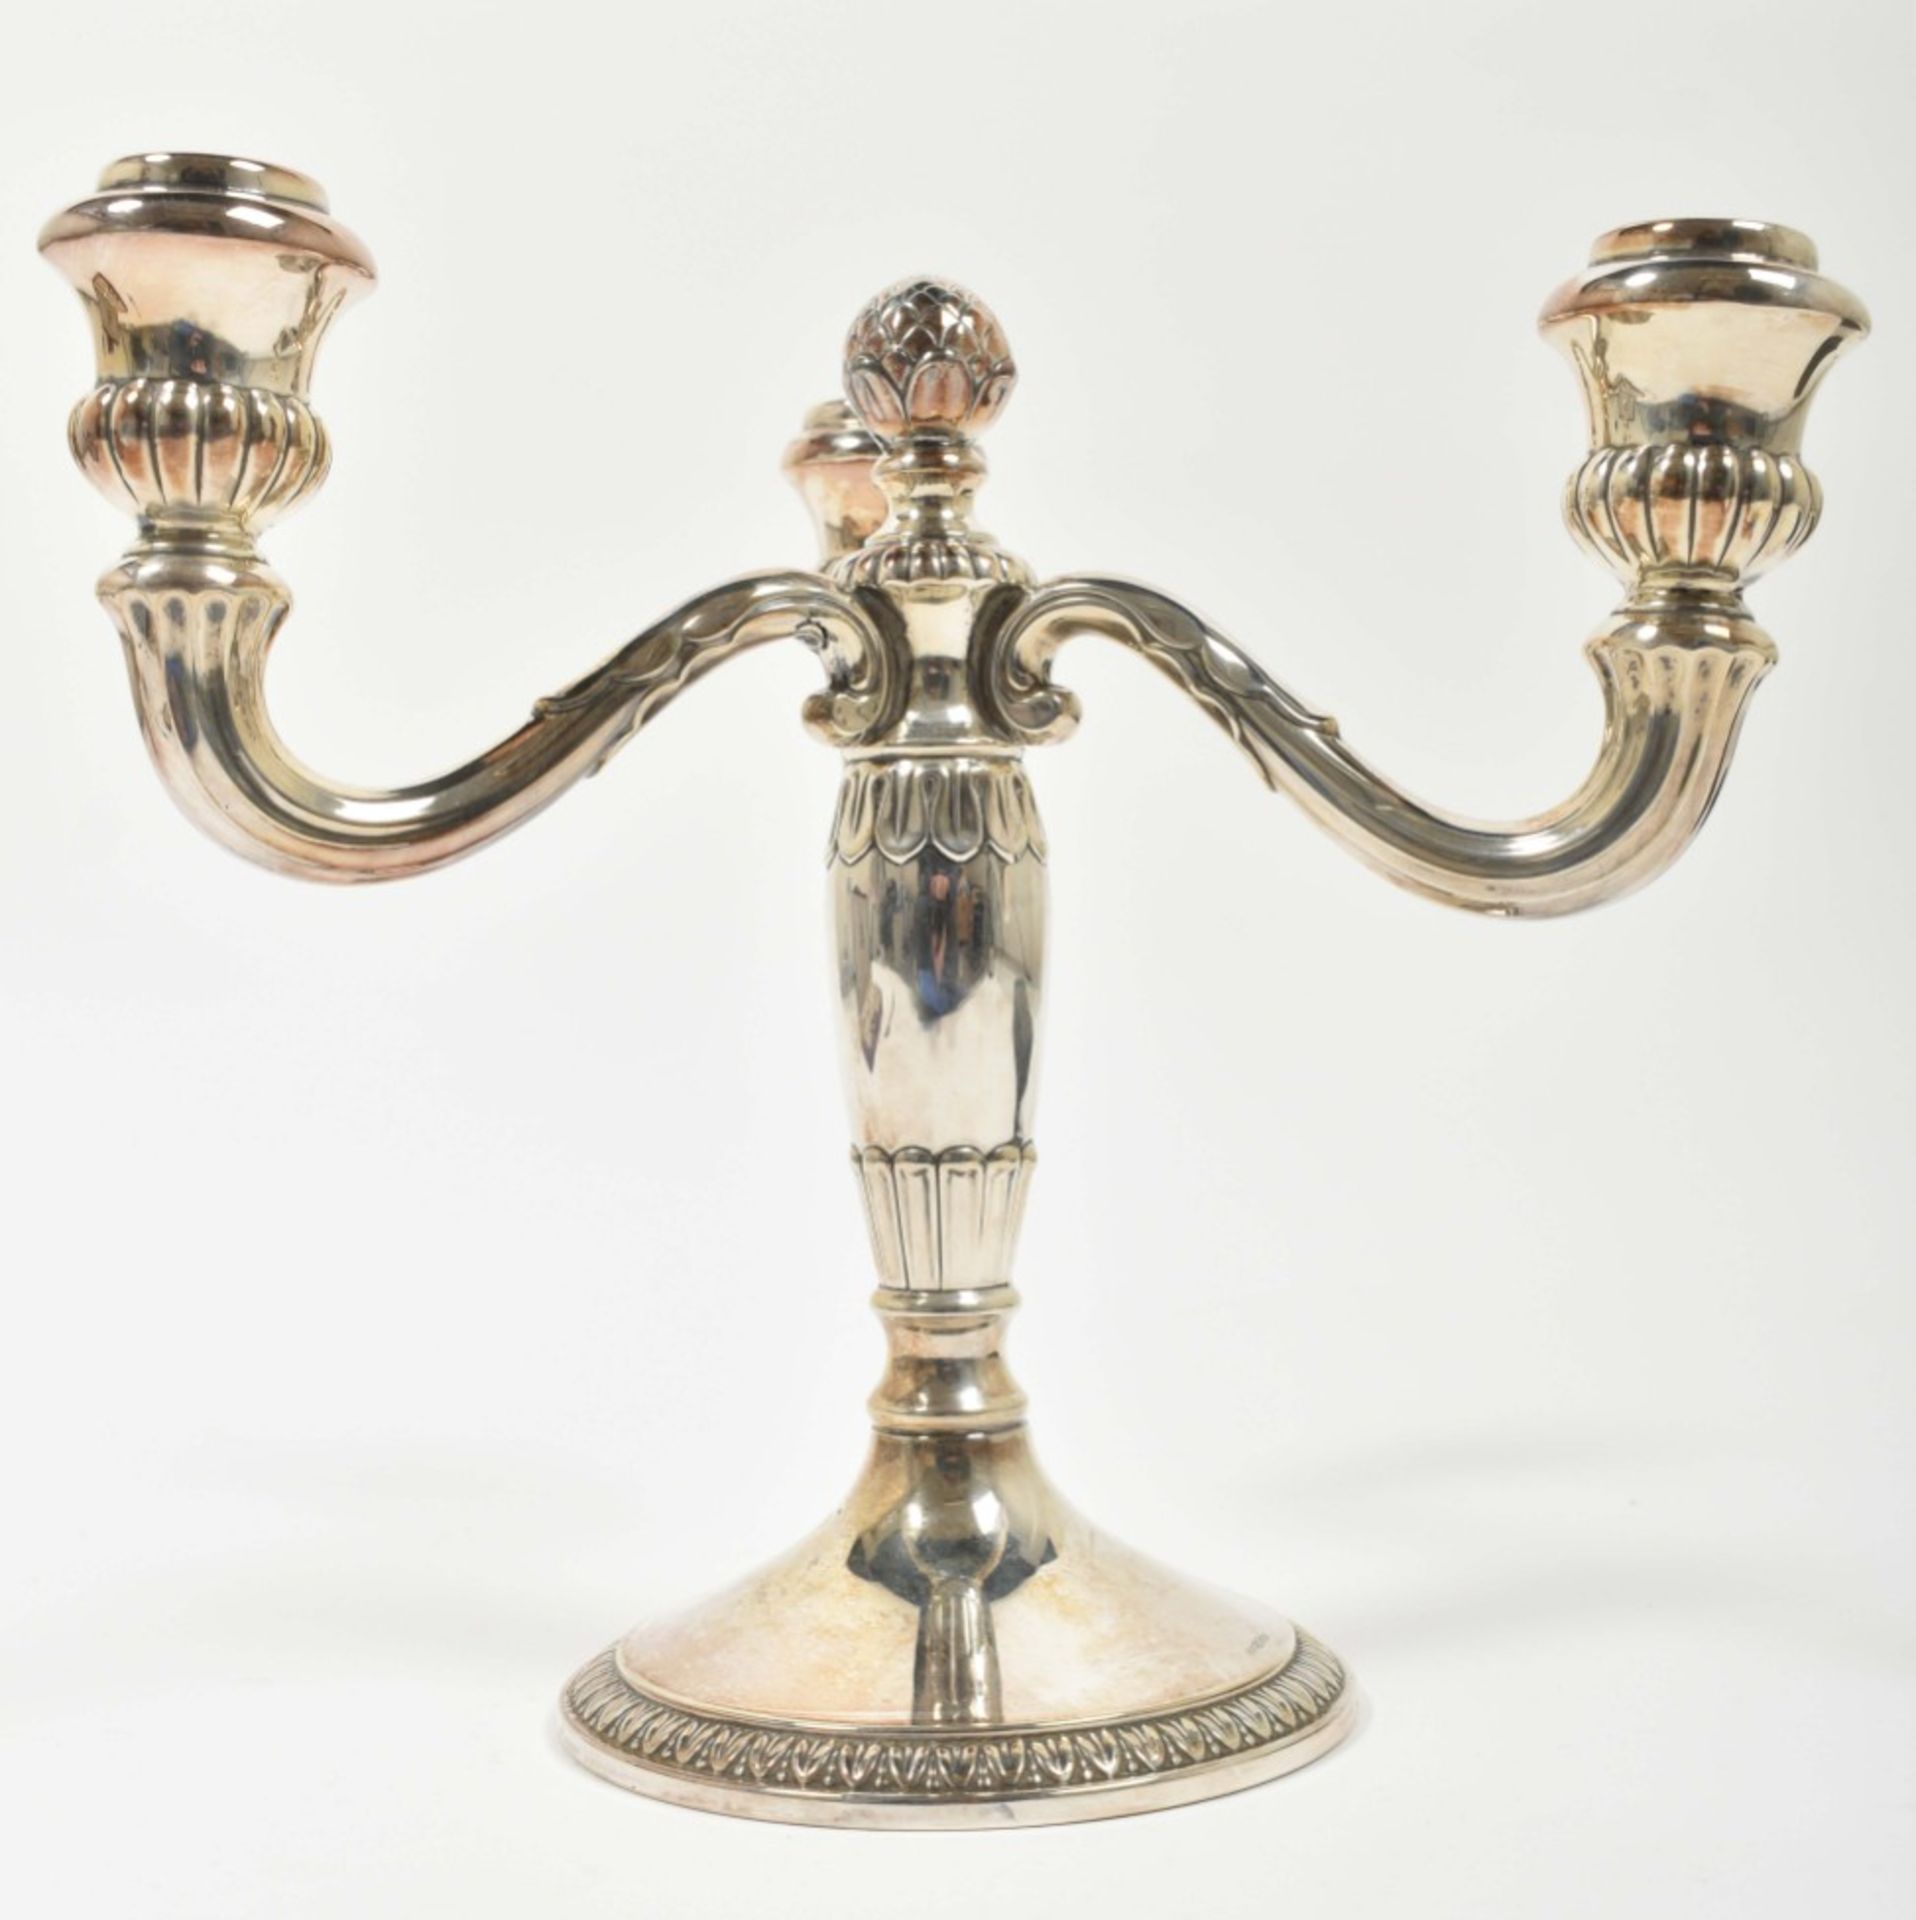 [Silver] Candlestick and silverware - Image 2 of 4